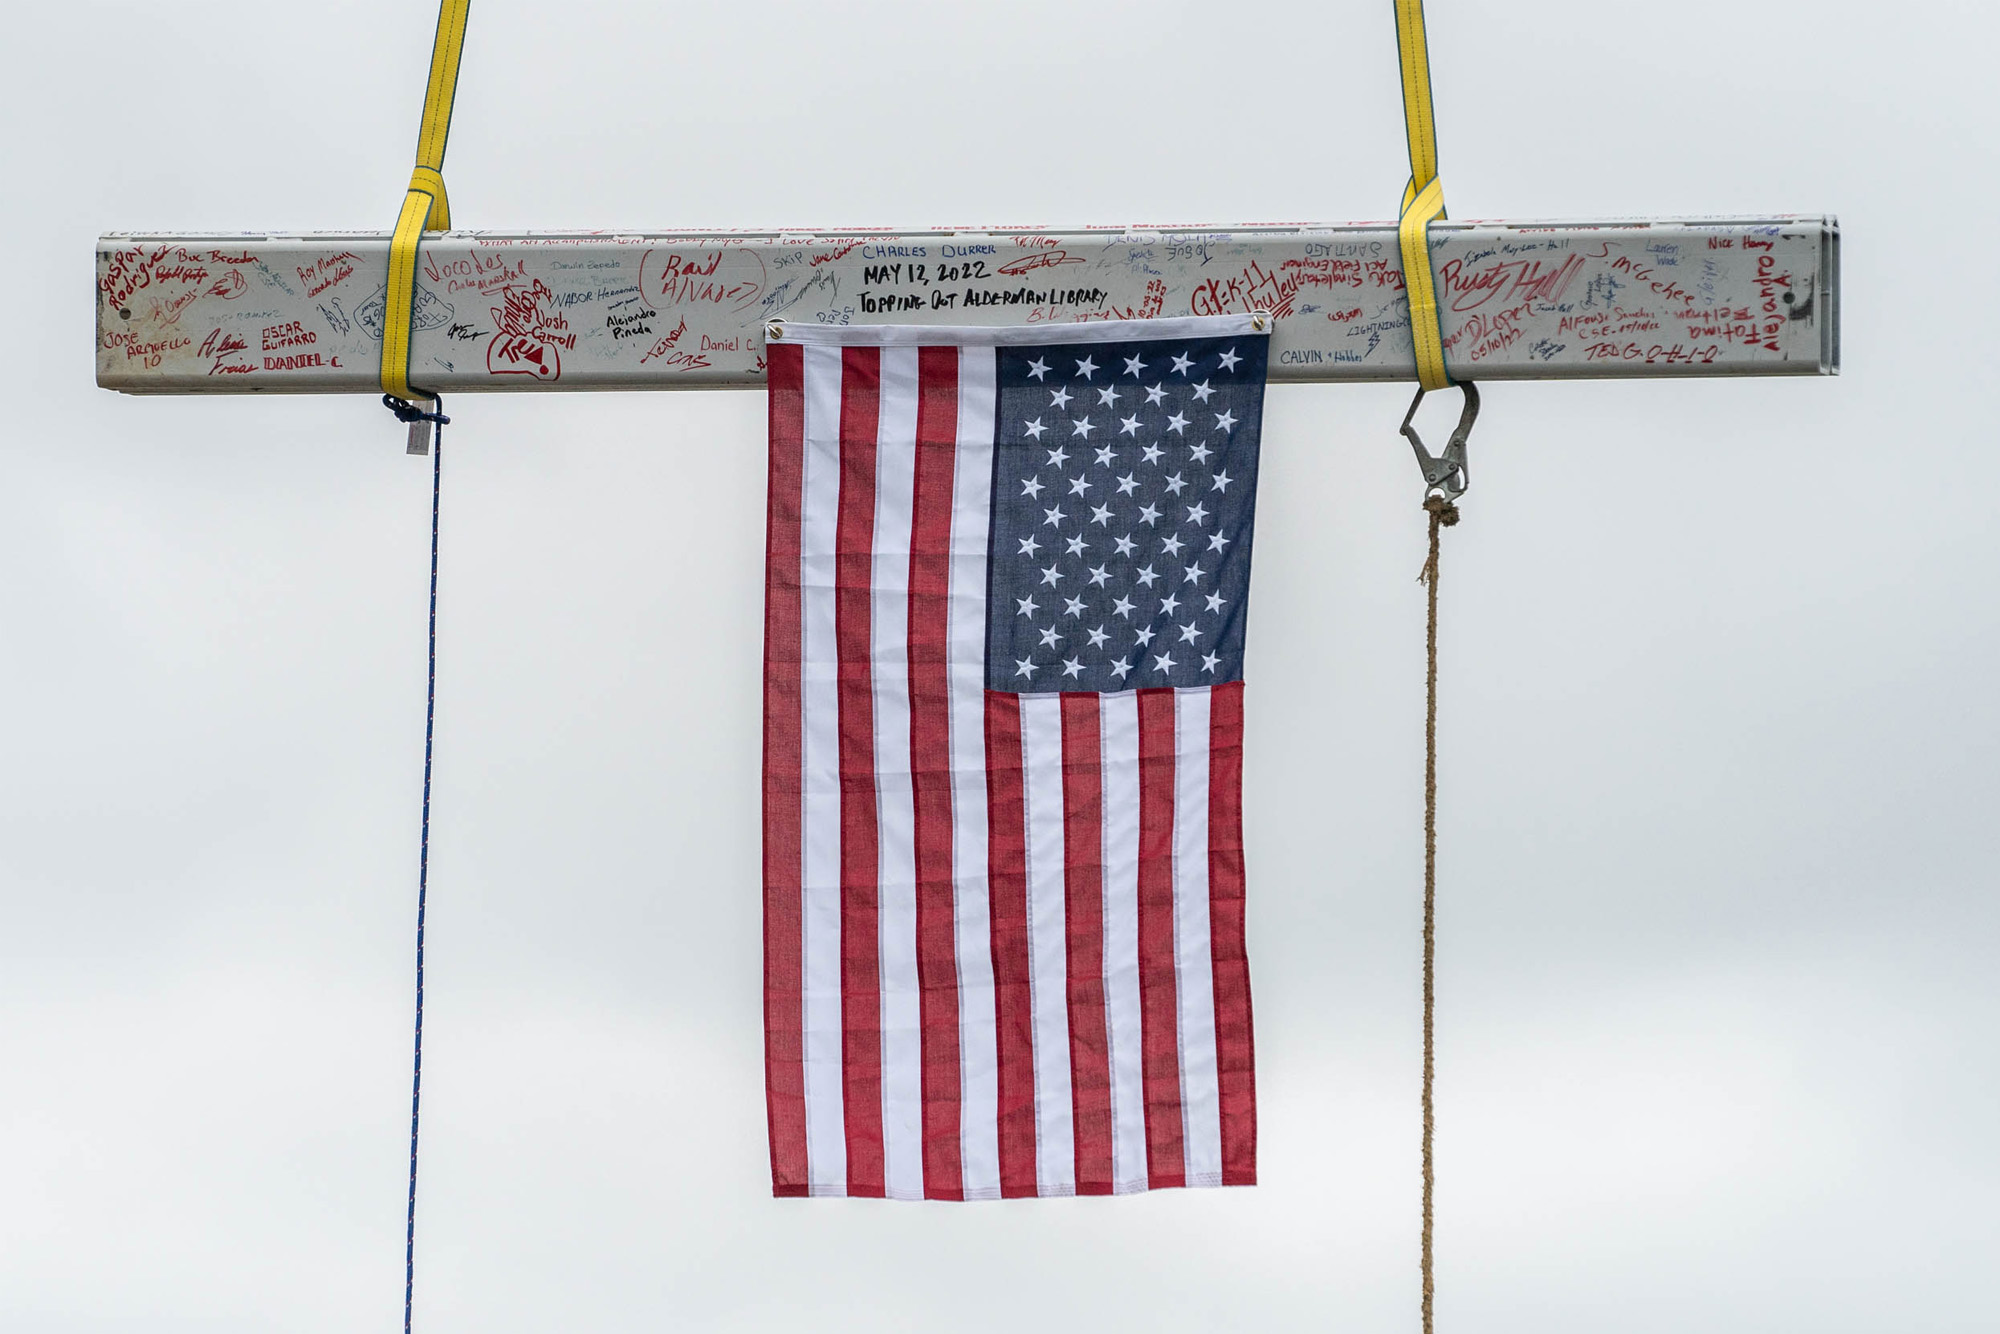 signed beam with American flag is hoisted into the air by a crane